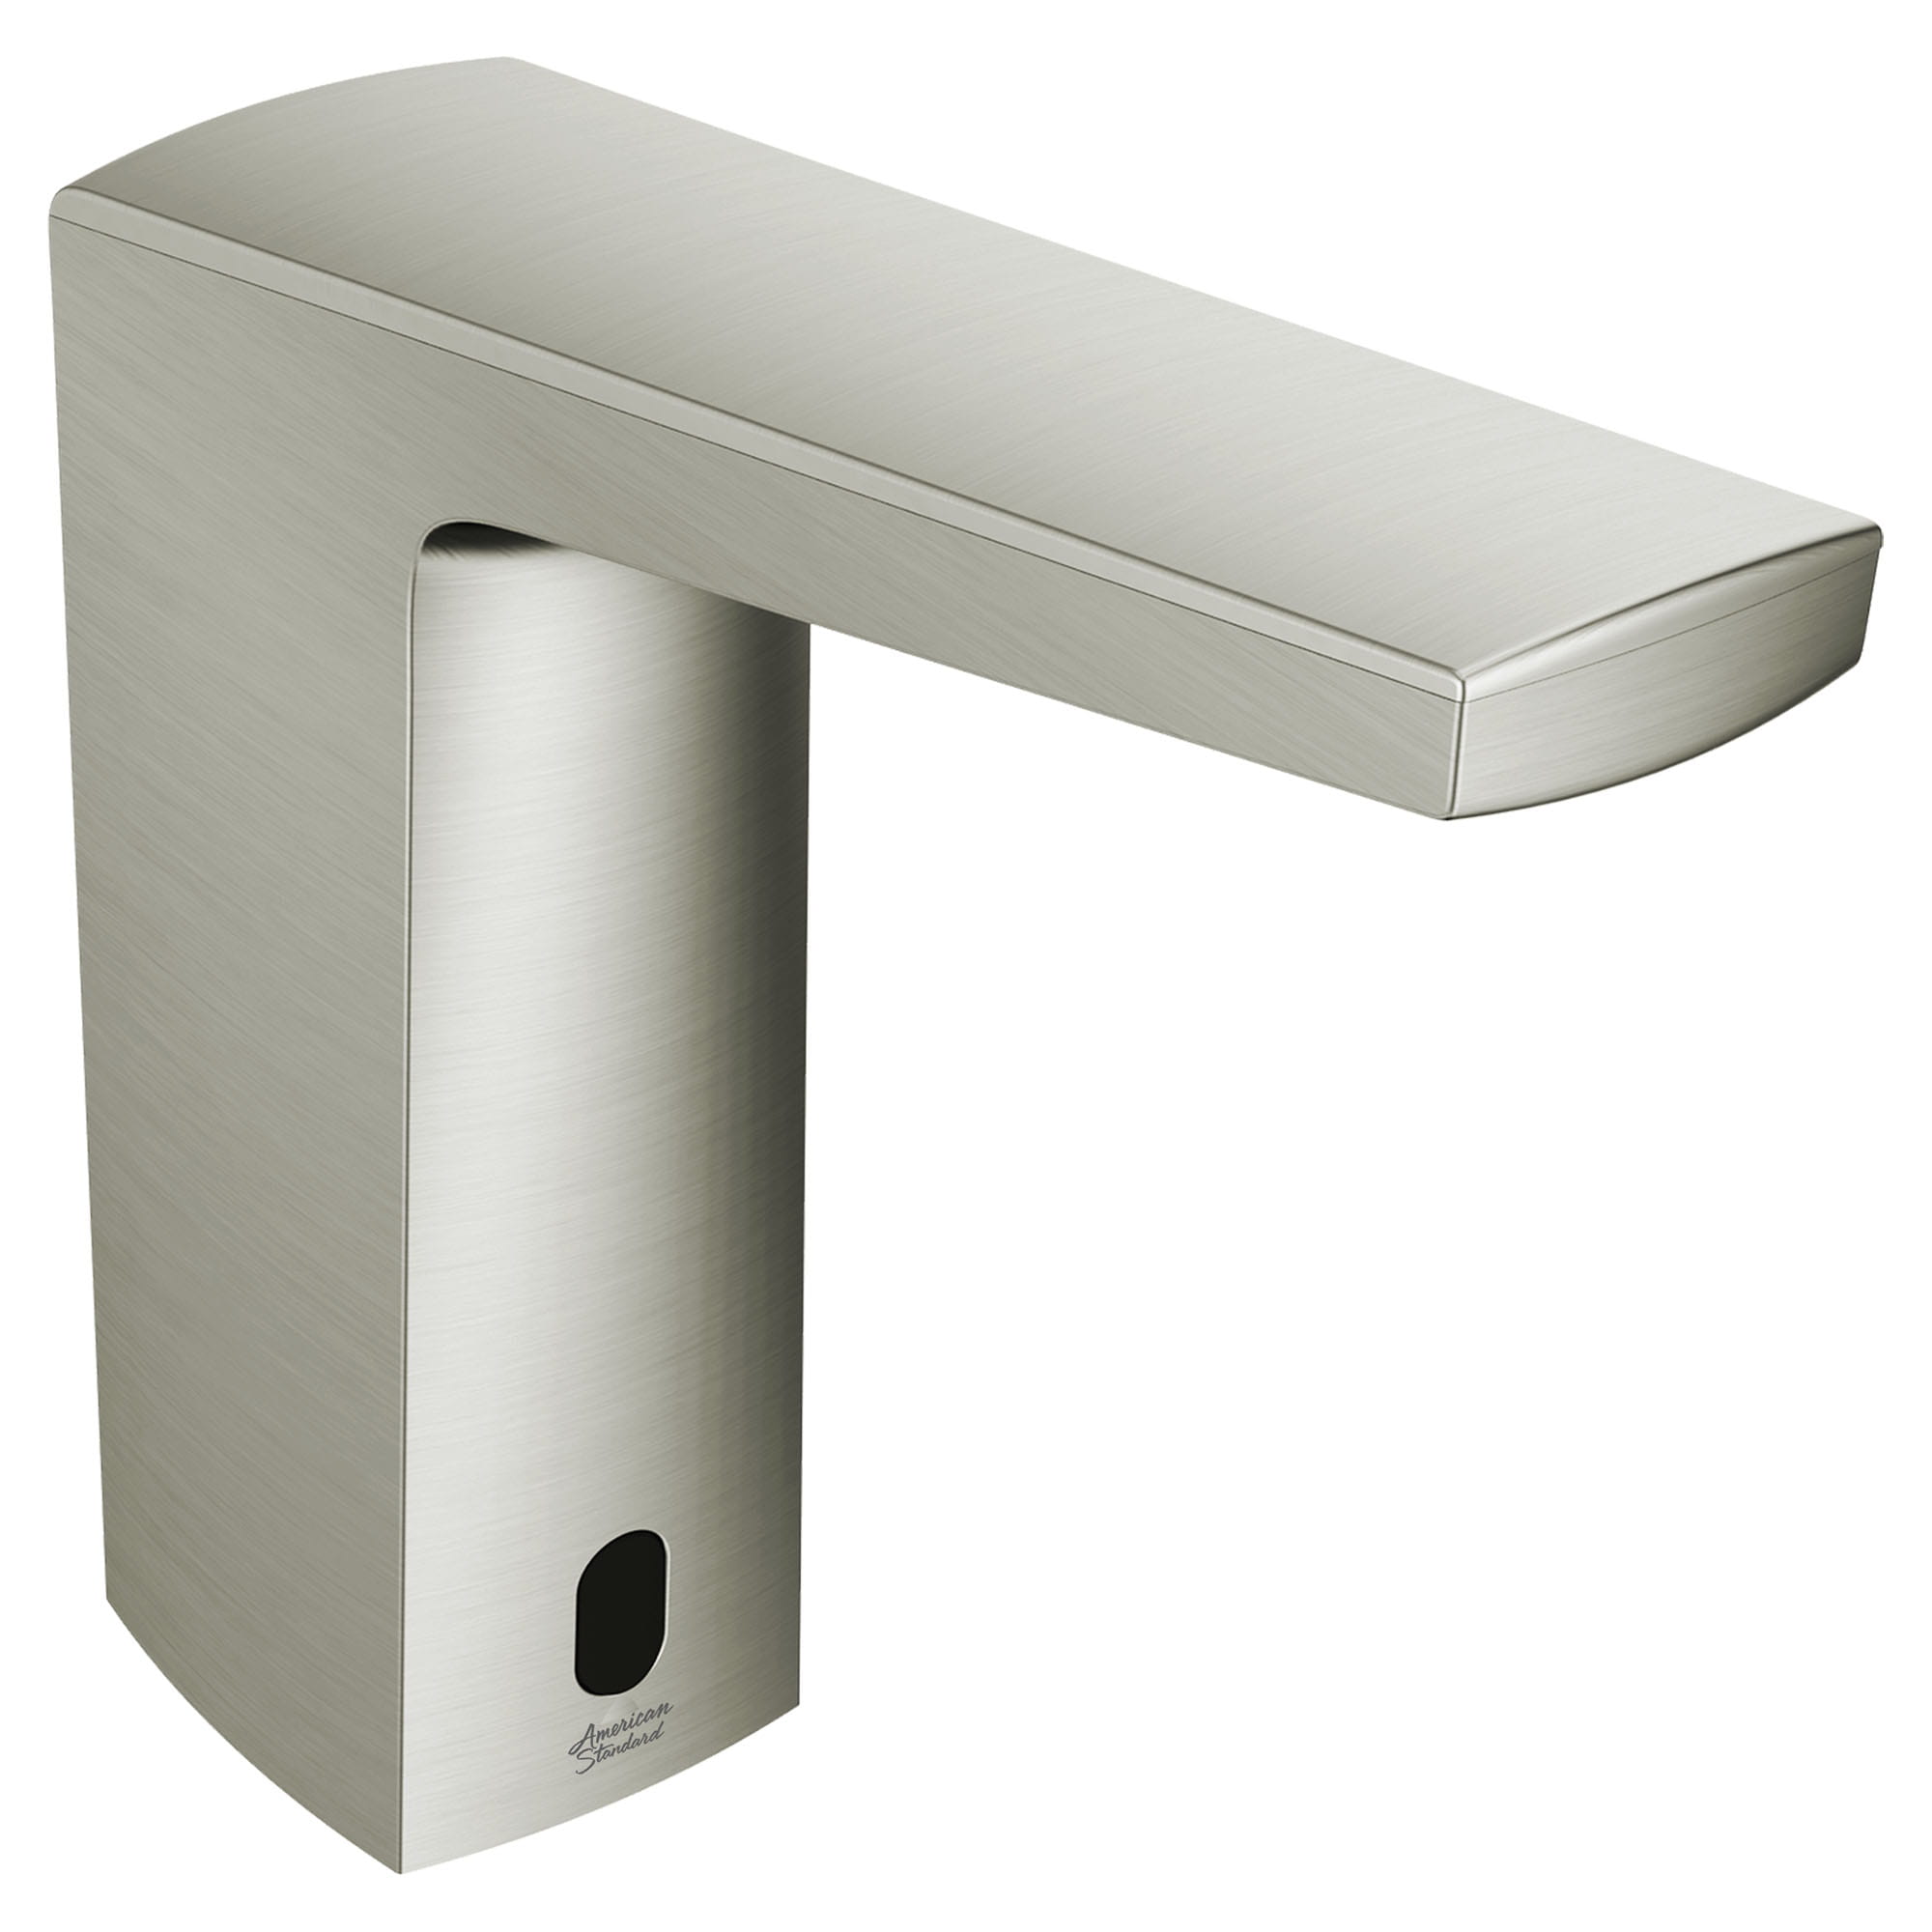 Paradigm Selectronic Touchless Faucet Battery Powered With Above Deck Mixing 15 gpm 57 Lpm   BRUSHED NICKEL